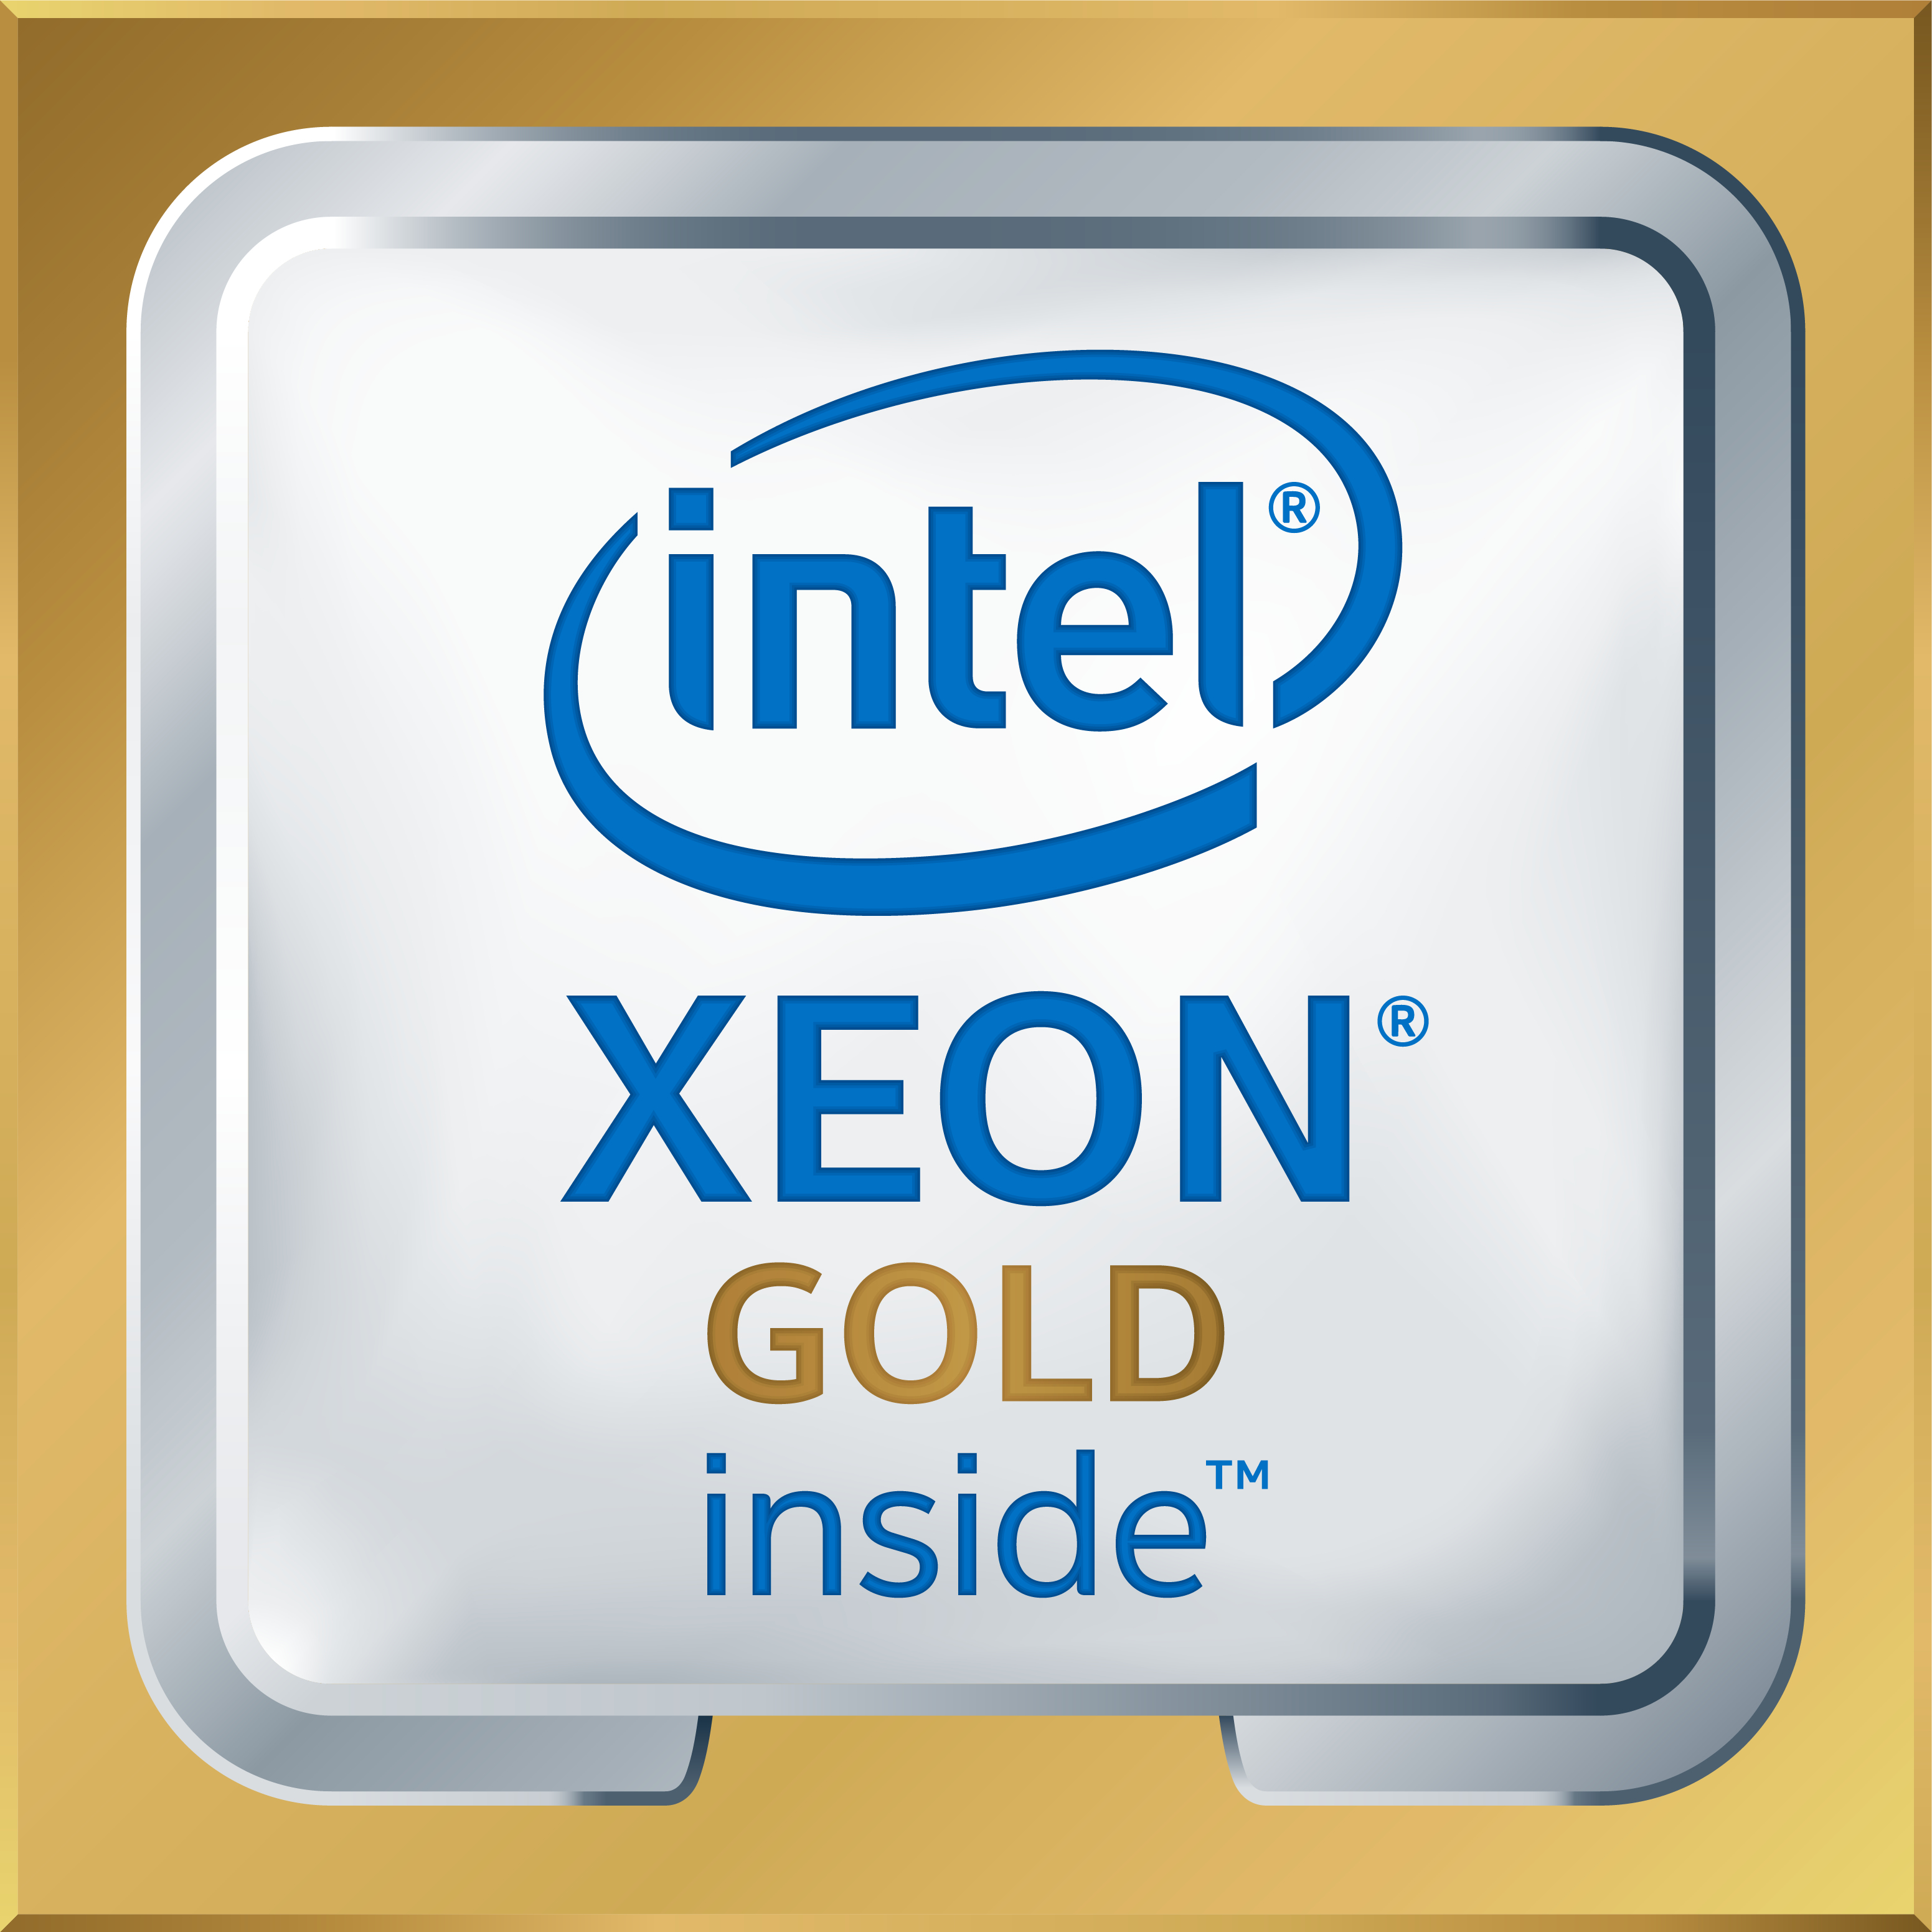 2 x Intel Xeon Gold 6130 - 2.1 GHz - 16-core - 22 MB cache - for ThinkSystem SN850